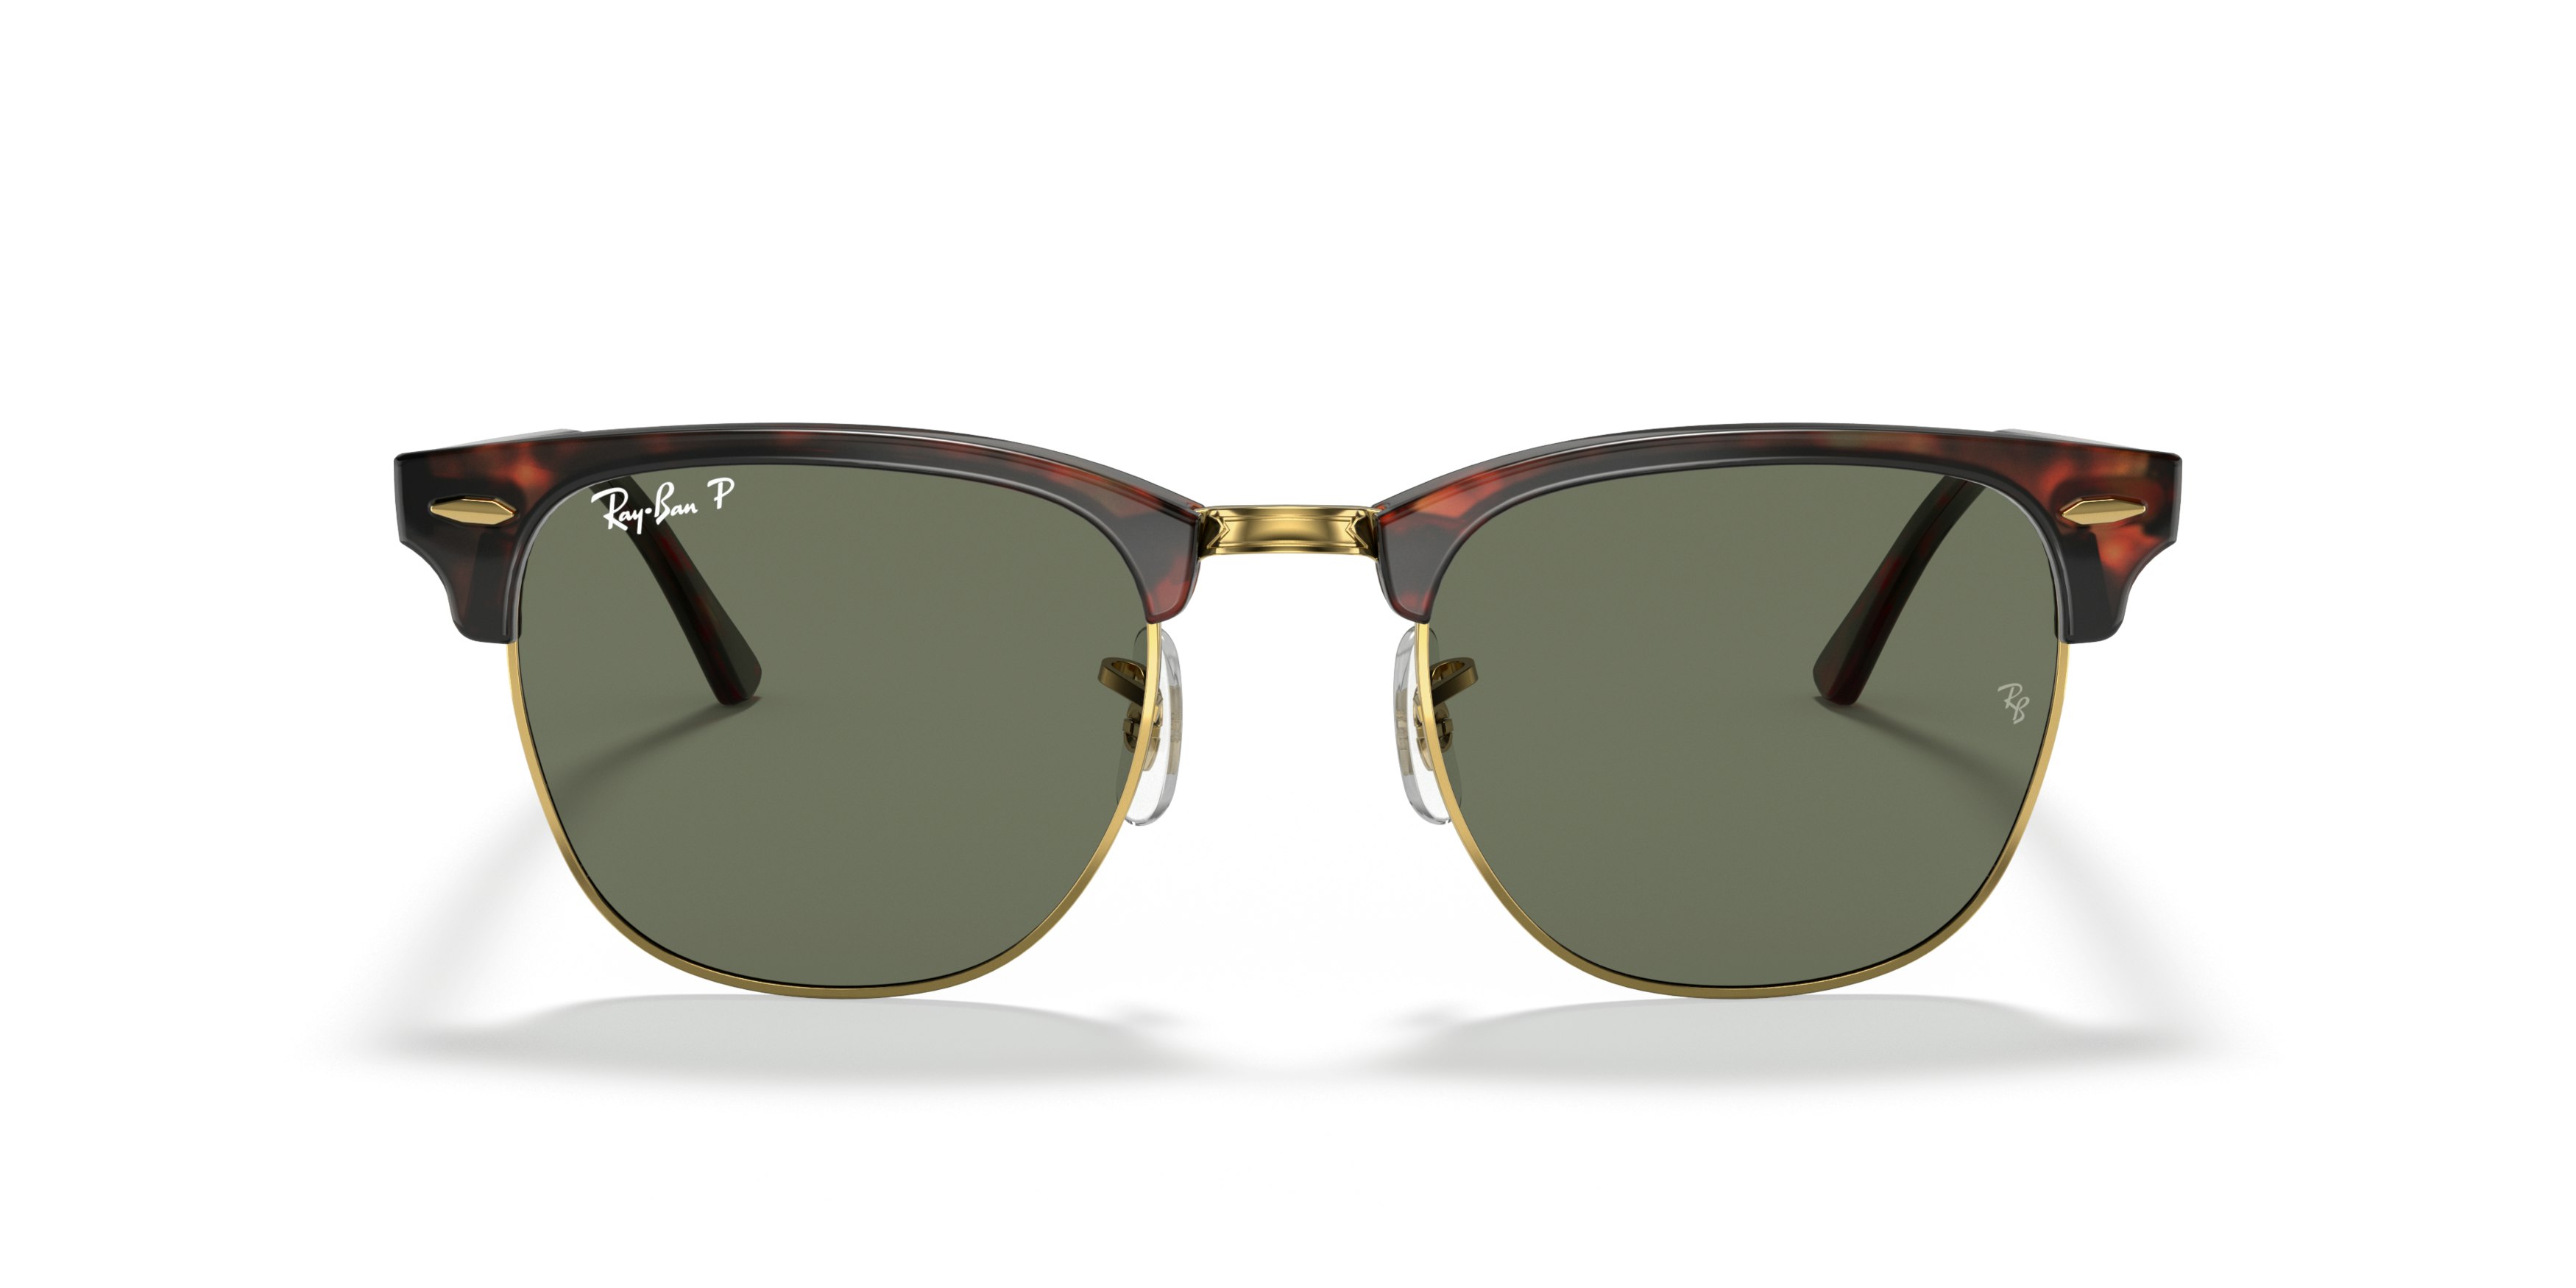 Ray-Ban Clubmaster RB3016 51mm